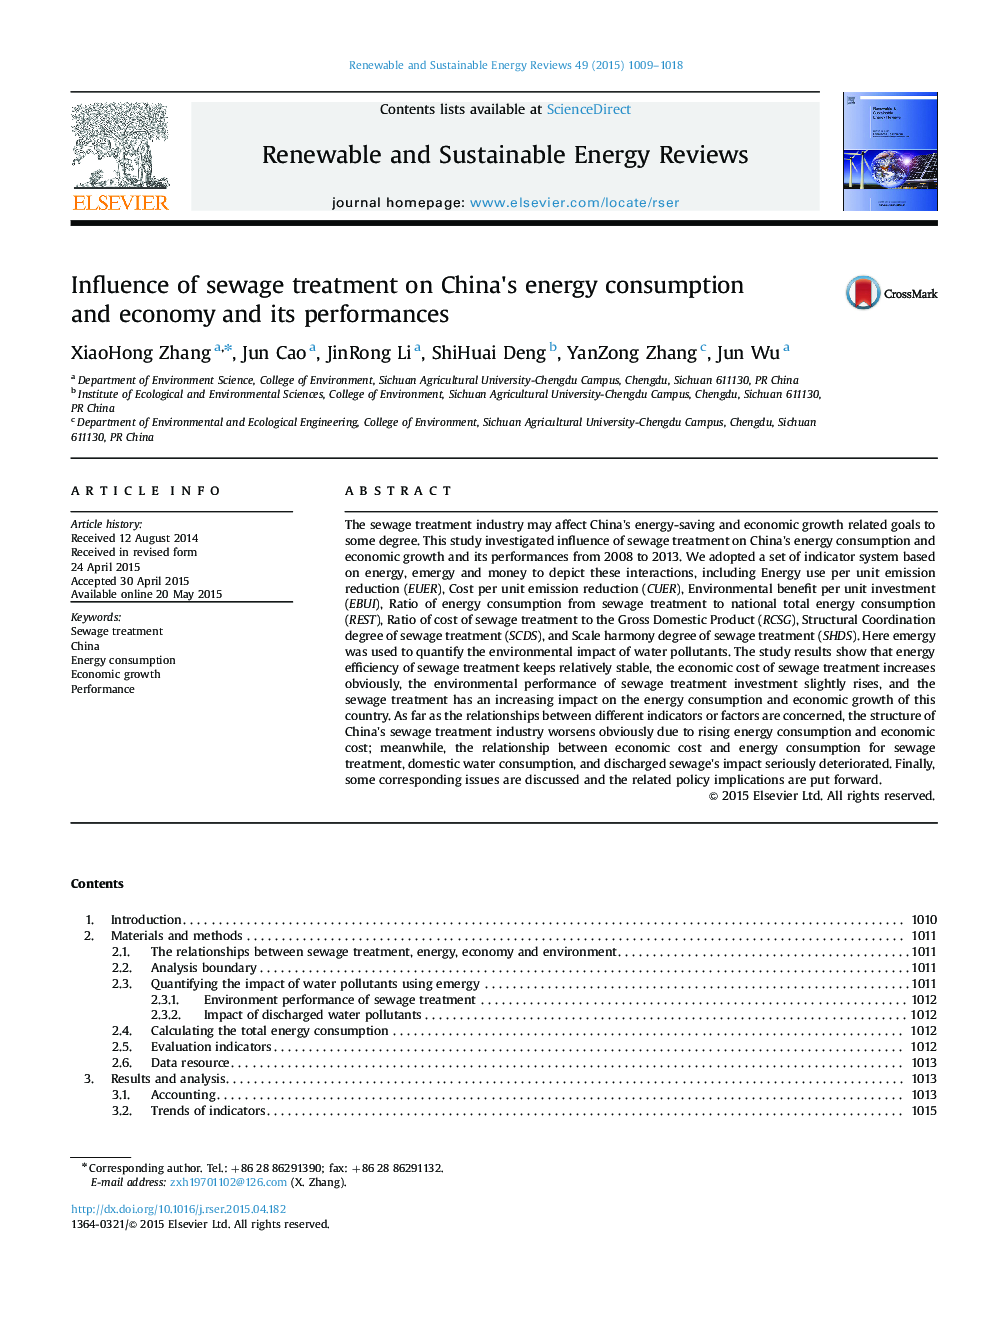 Influence of sewage treatment on China×³s energy consumption and economy and its performances